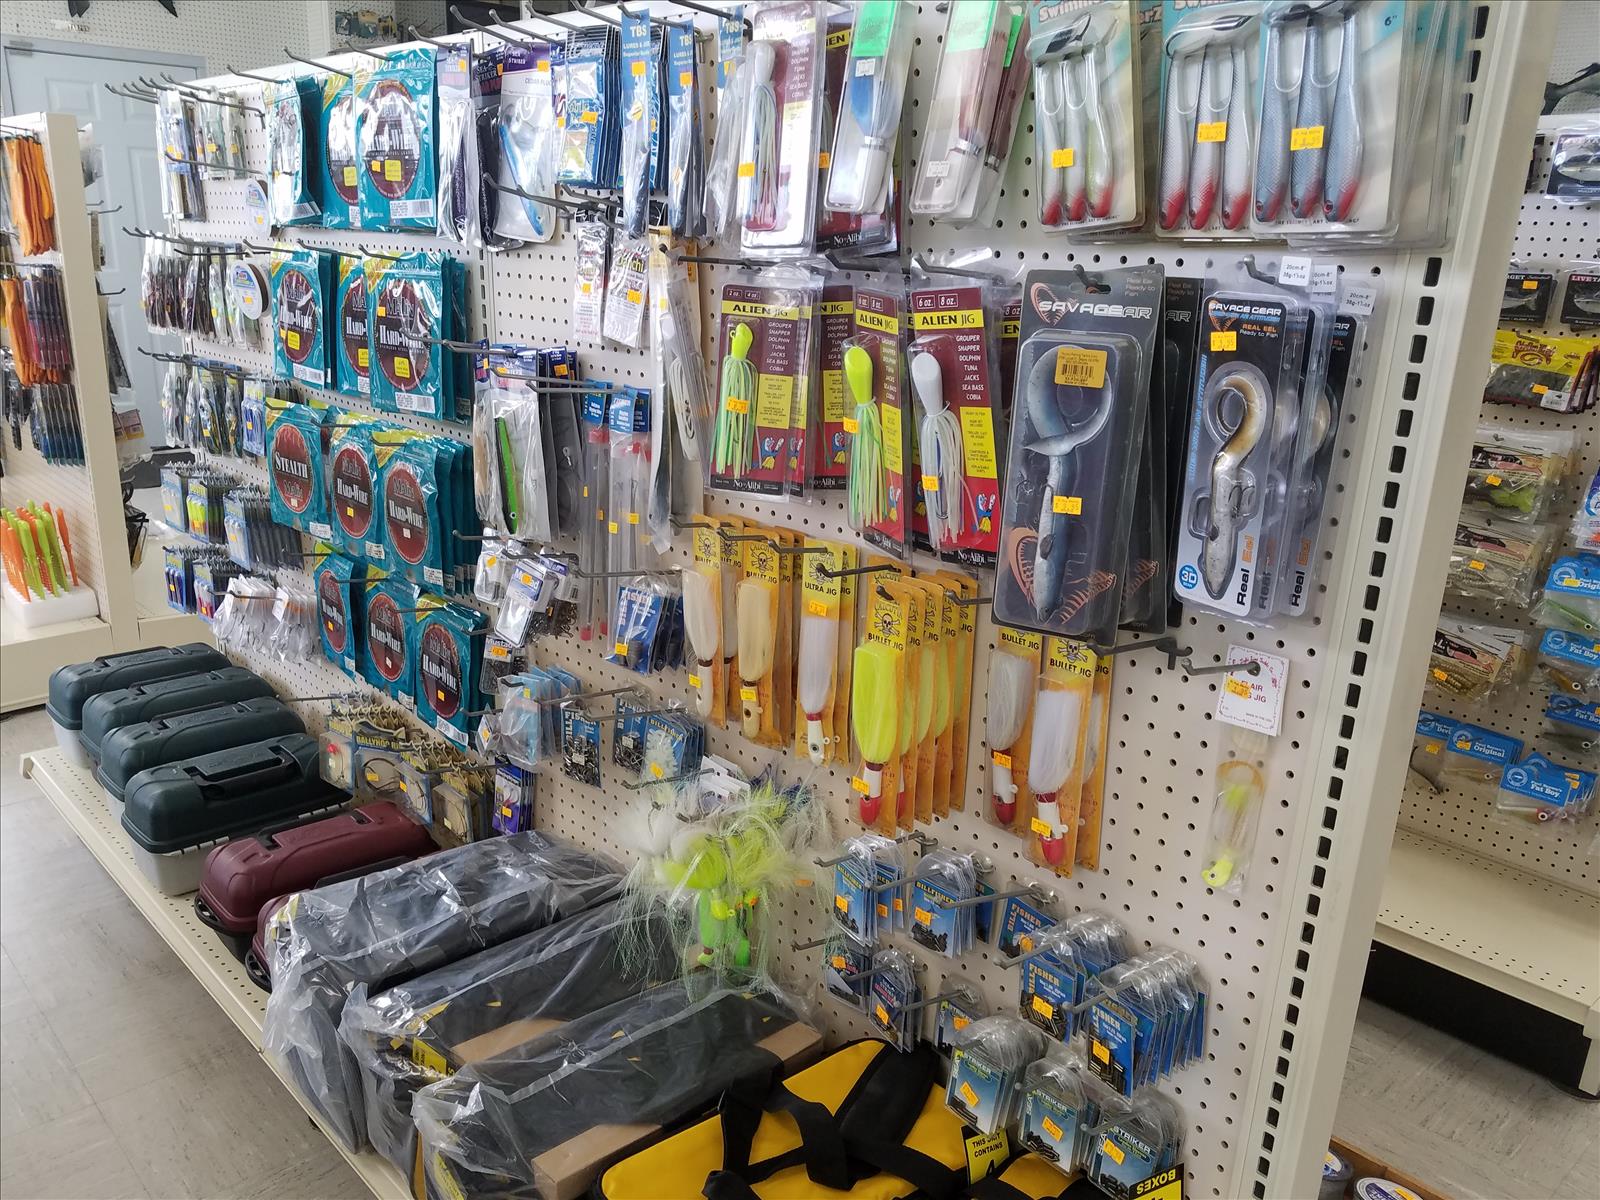 St-Augustine-Marina-Fishing-Tackle-Supplies-Gear-18